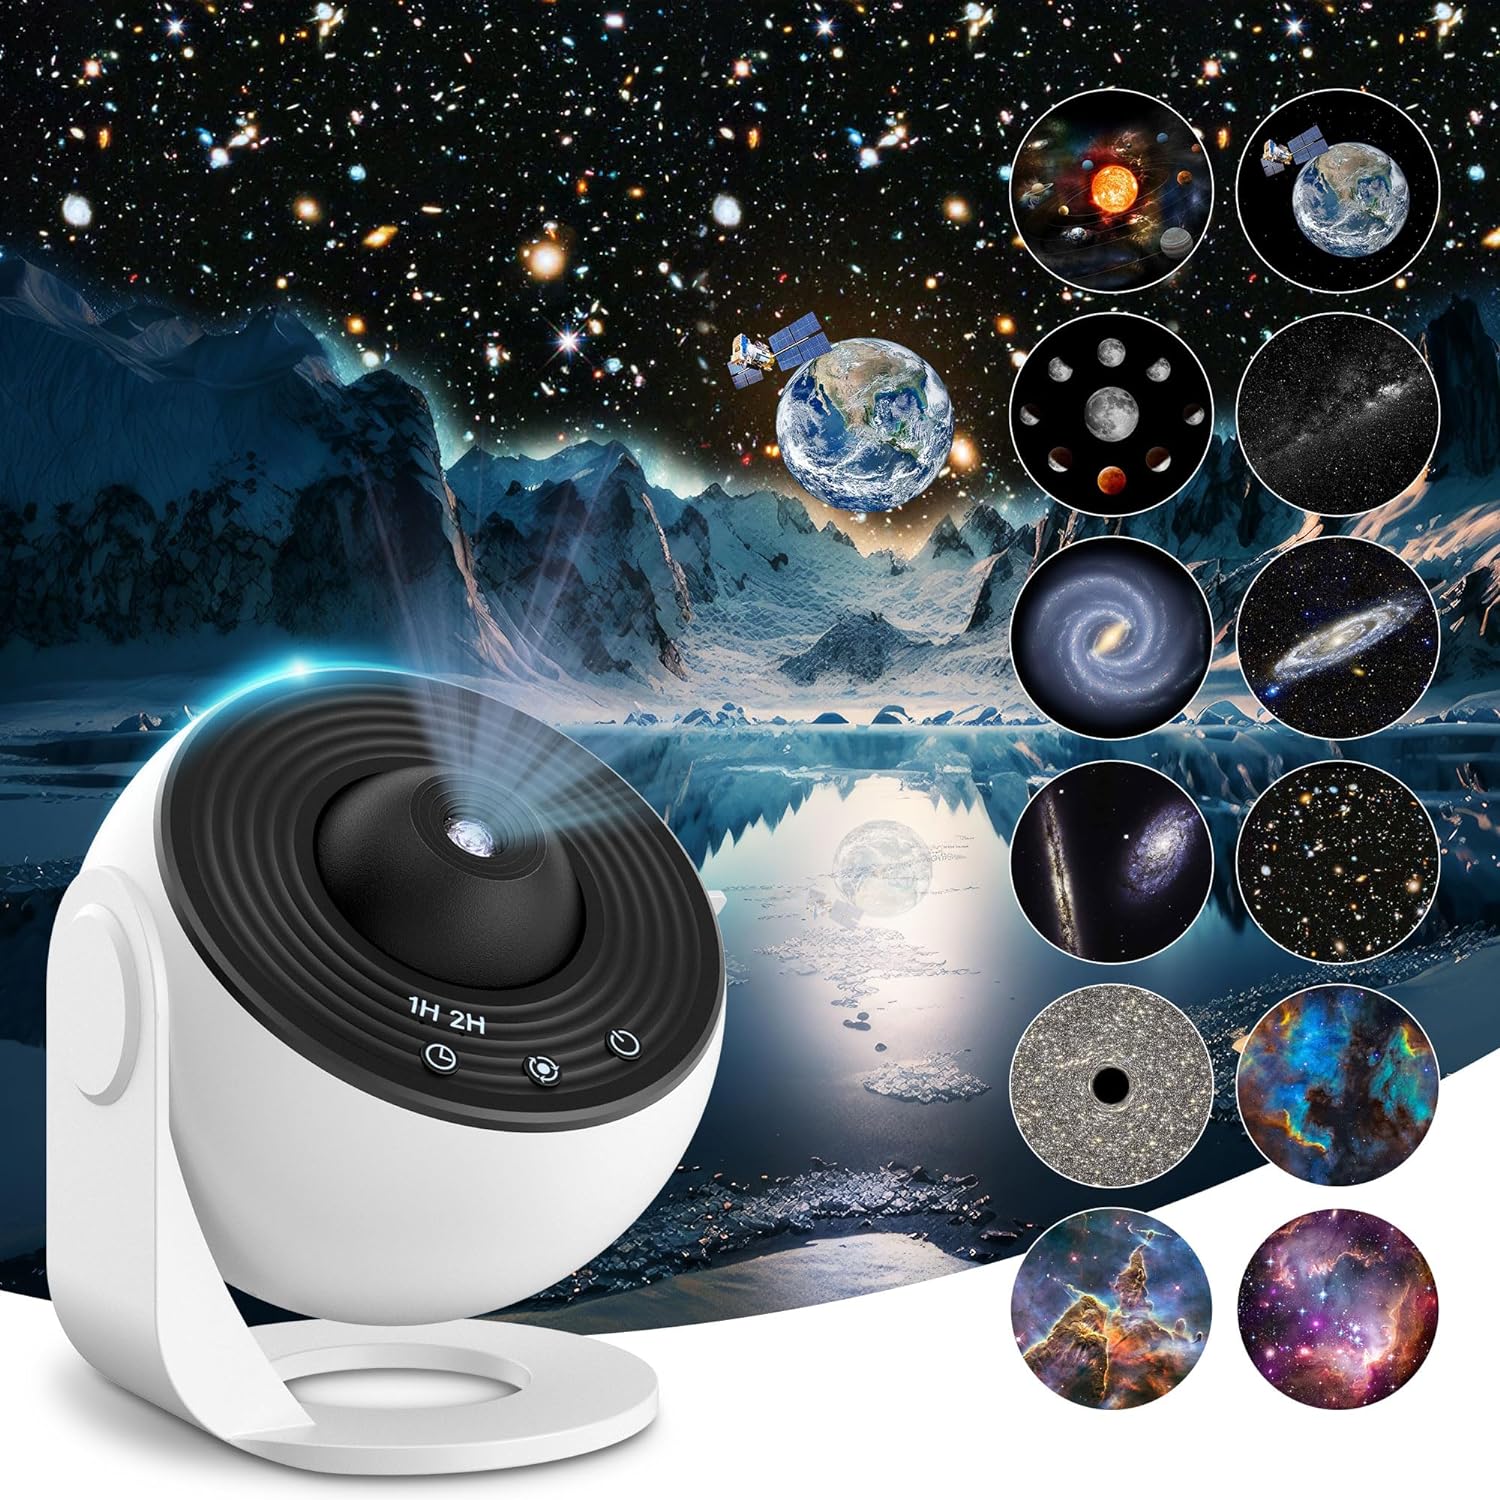 Planetarium Star Projector, Mexllex Realistic Galaxy Light Projector with 12 Planet Discs, Starry Sky Night Light Projector Lamp, Moon Night Light for Kids Adults Ceiling Bedroom Living Room, Party [Energy Class A+] 2